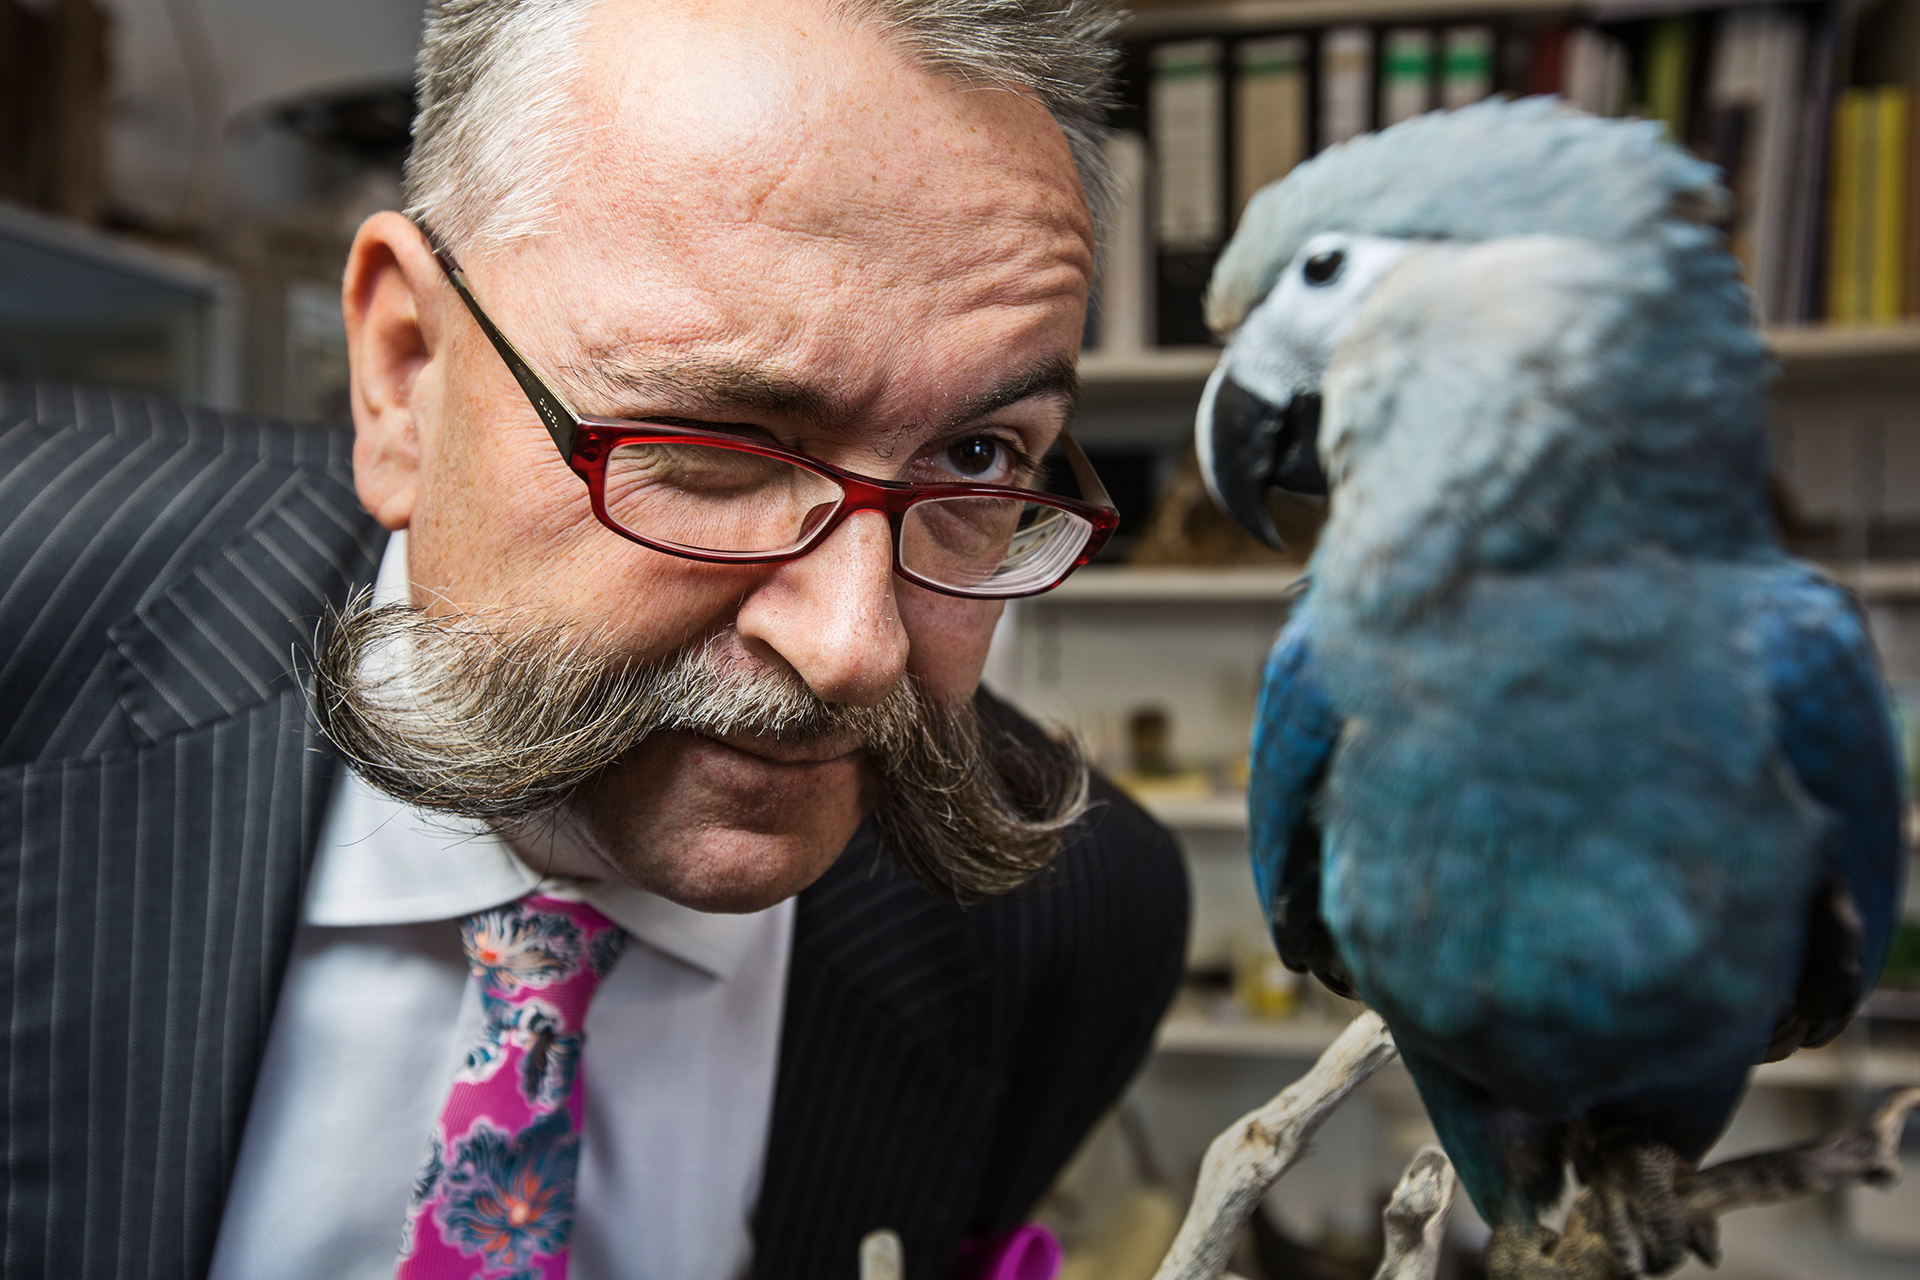  Museum Director Prof. Johannes Vogel inspects a Spix Ara, a species of macaws believed to be extinct in the wild.  Berlin, Germany.  